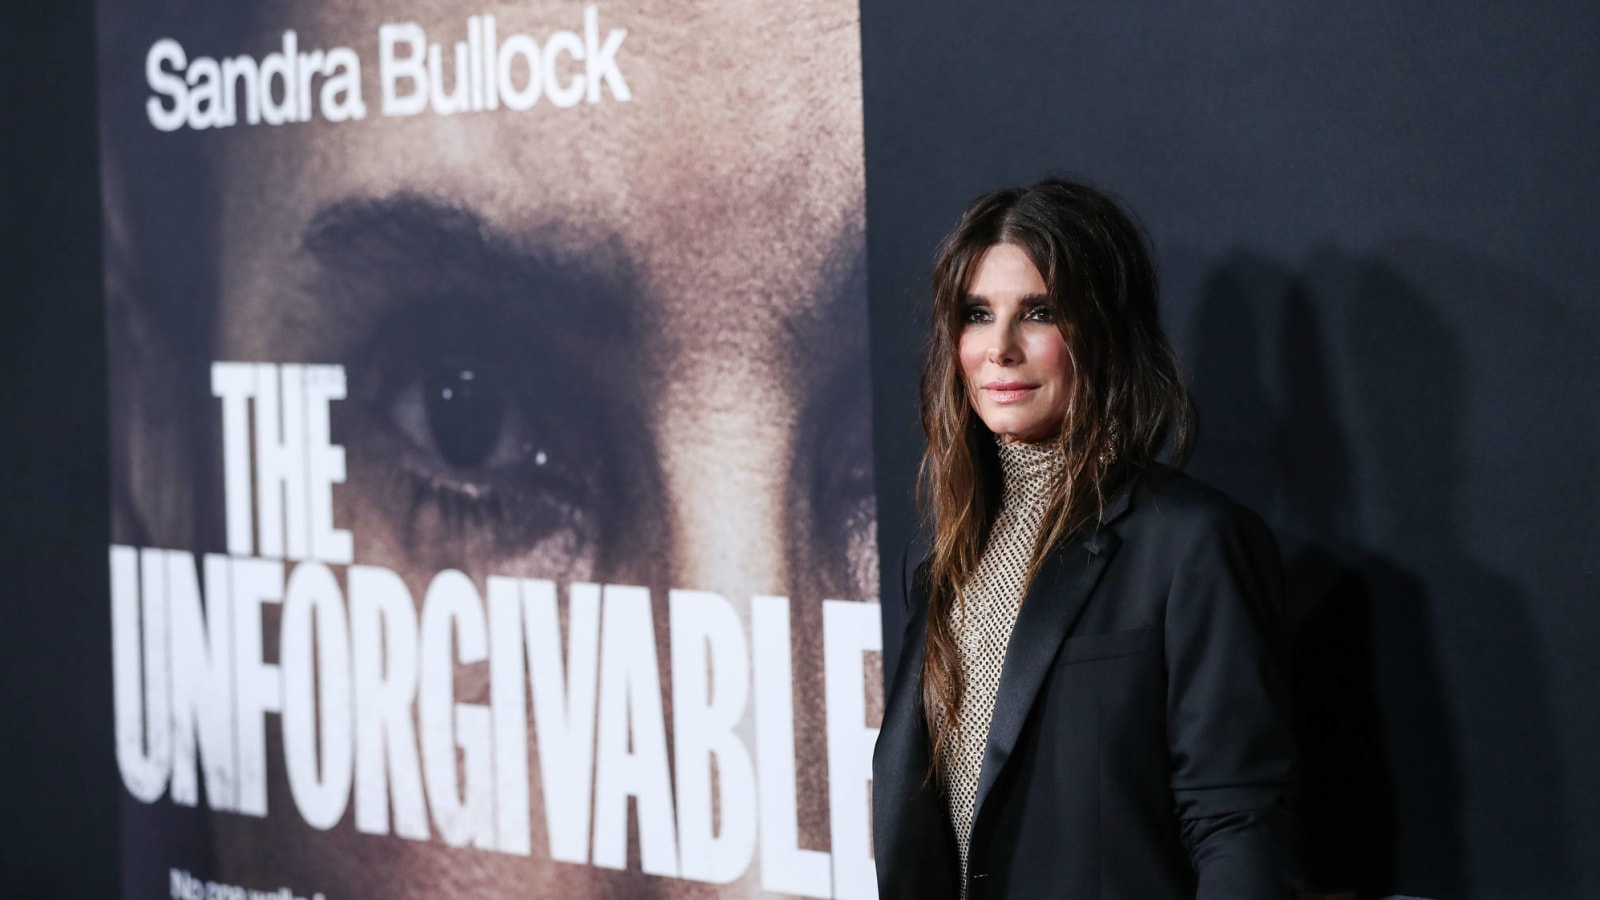 Bullock: 'The Unforgivable' is 'my love letter' to daughter